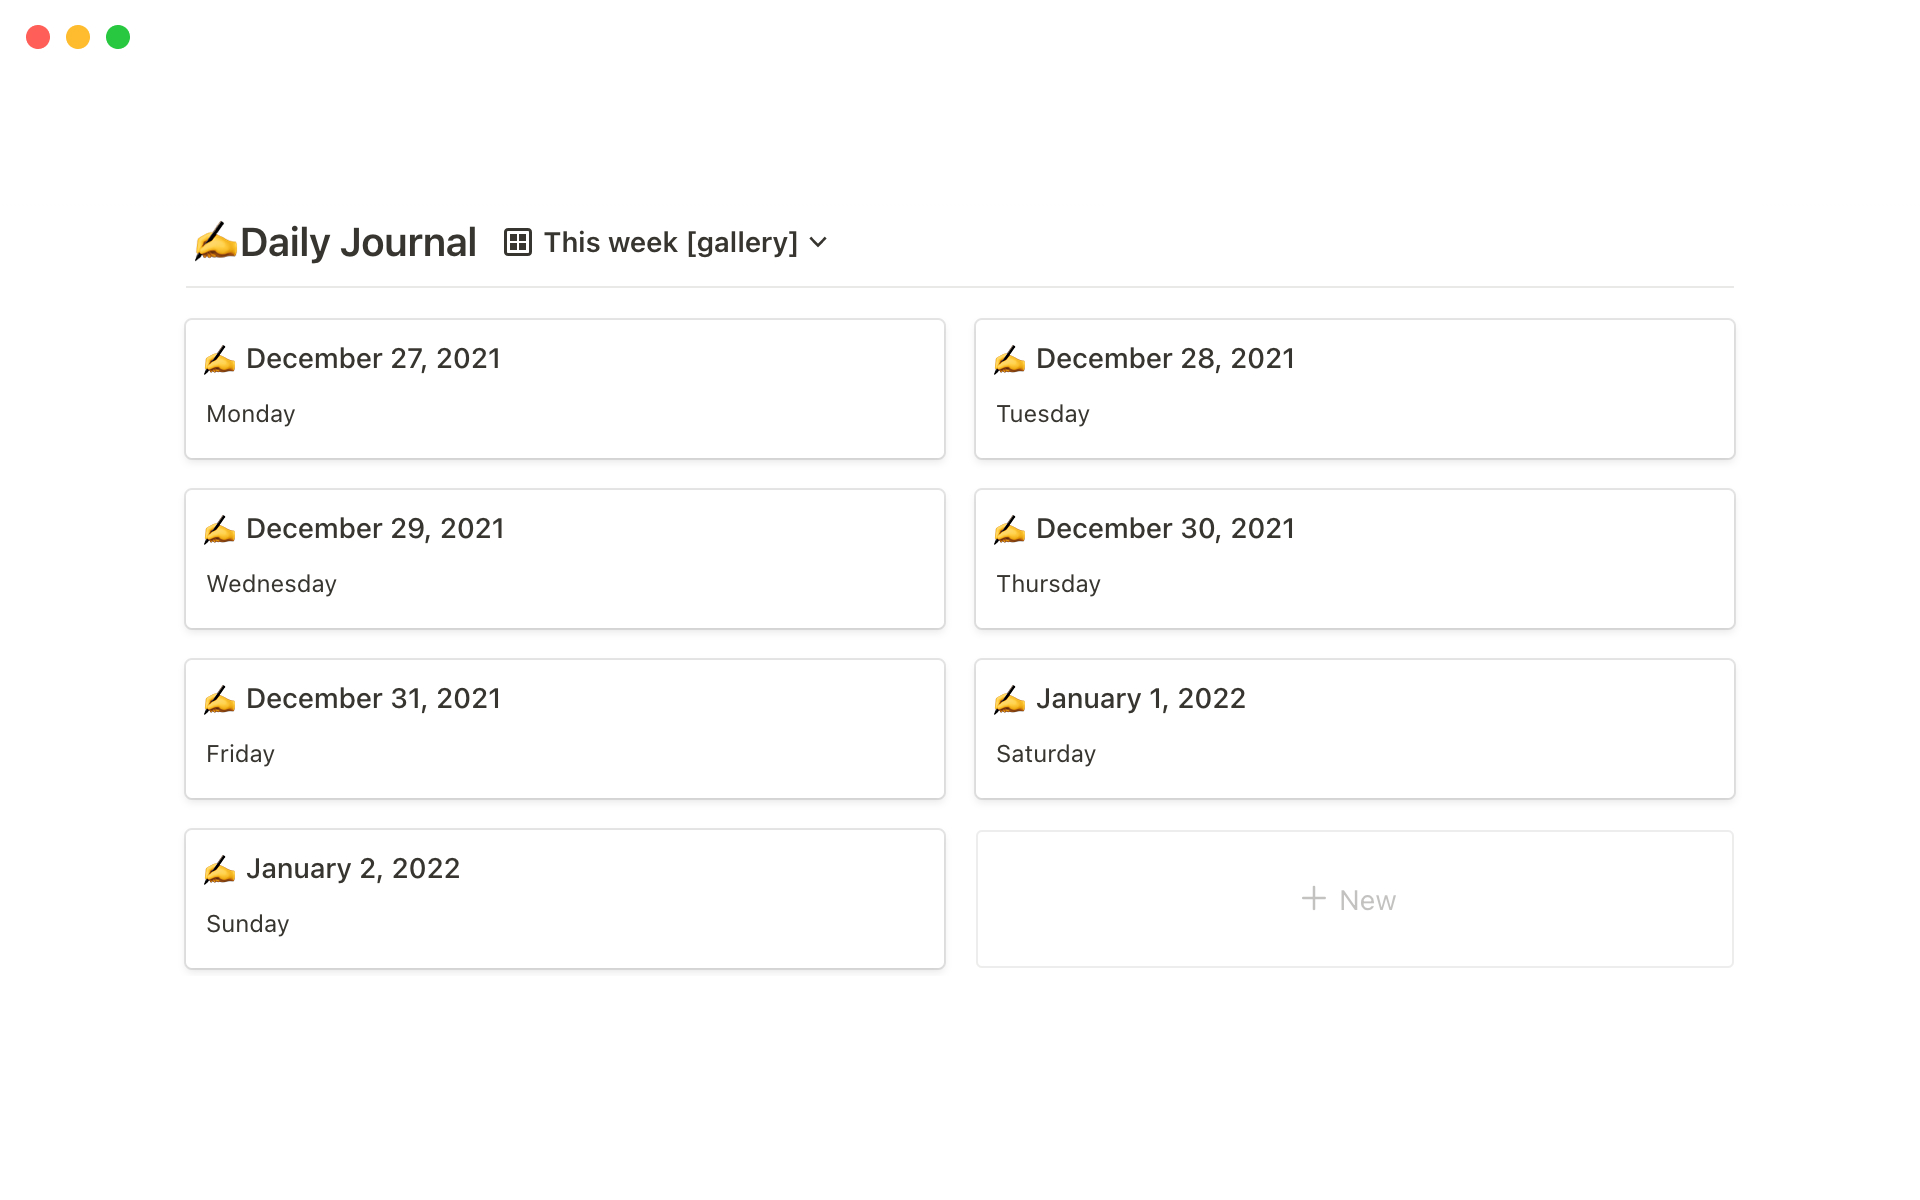 This template allows you to start a daily journal in Notion right away.